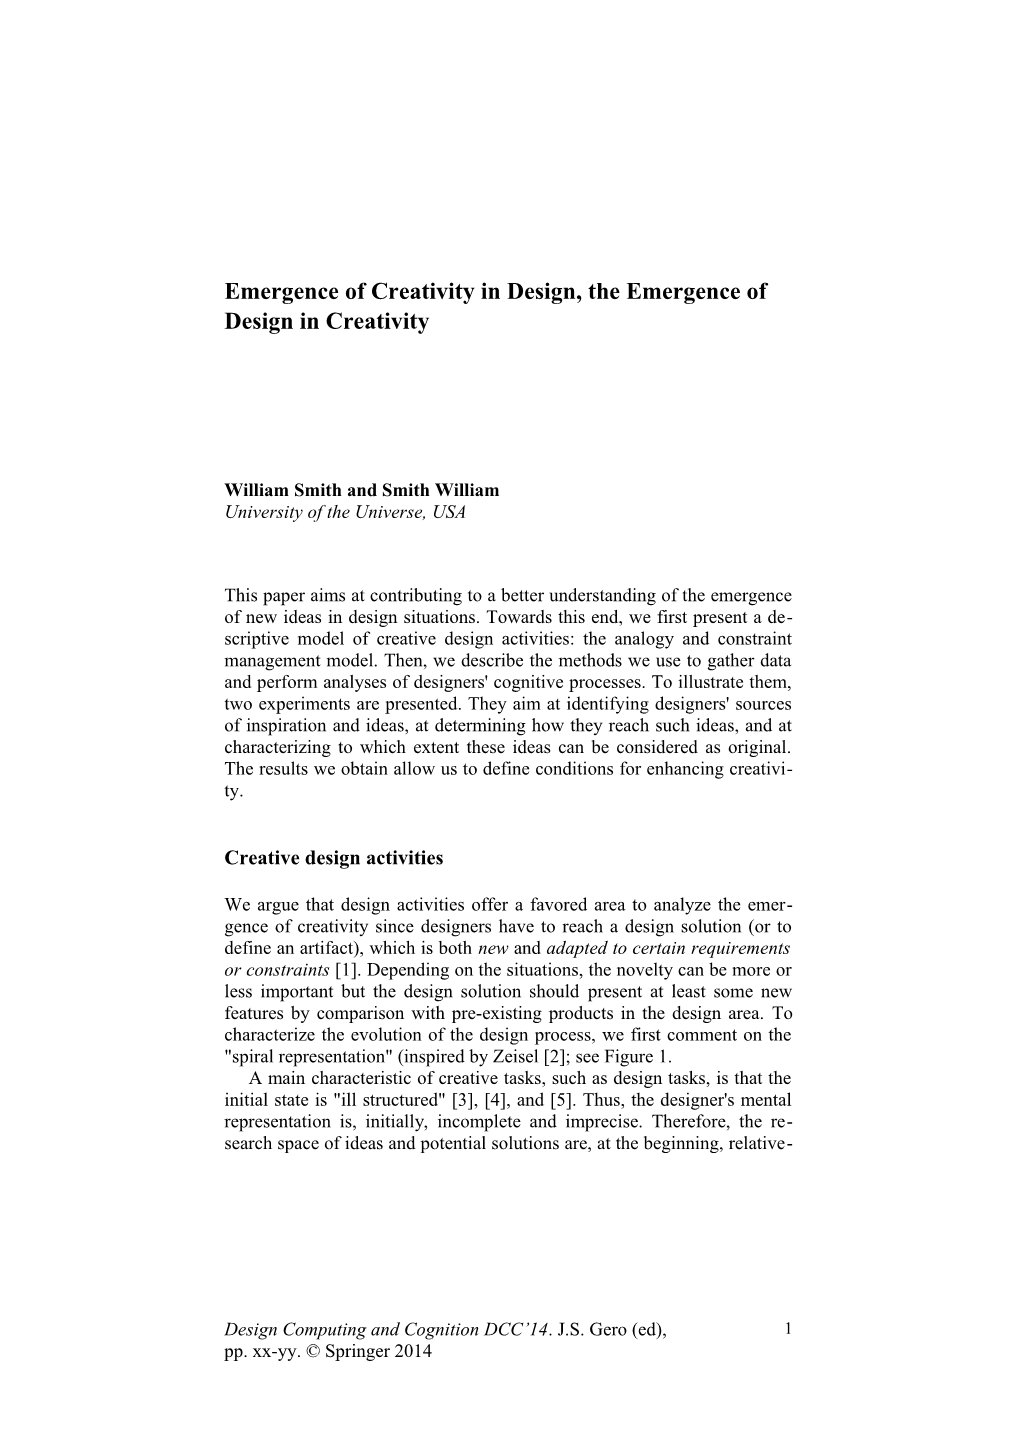 Emergence of Creativity in Design, the Emergence of Design in Creativity